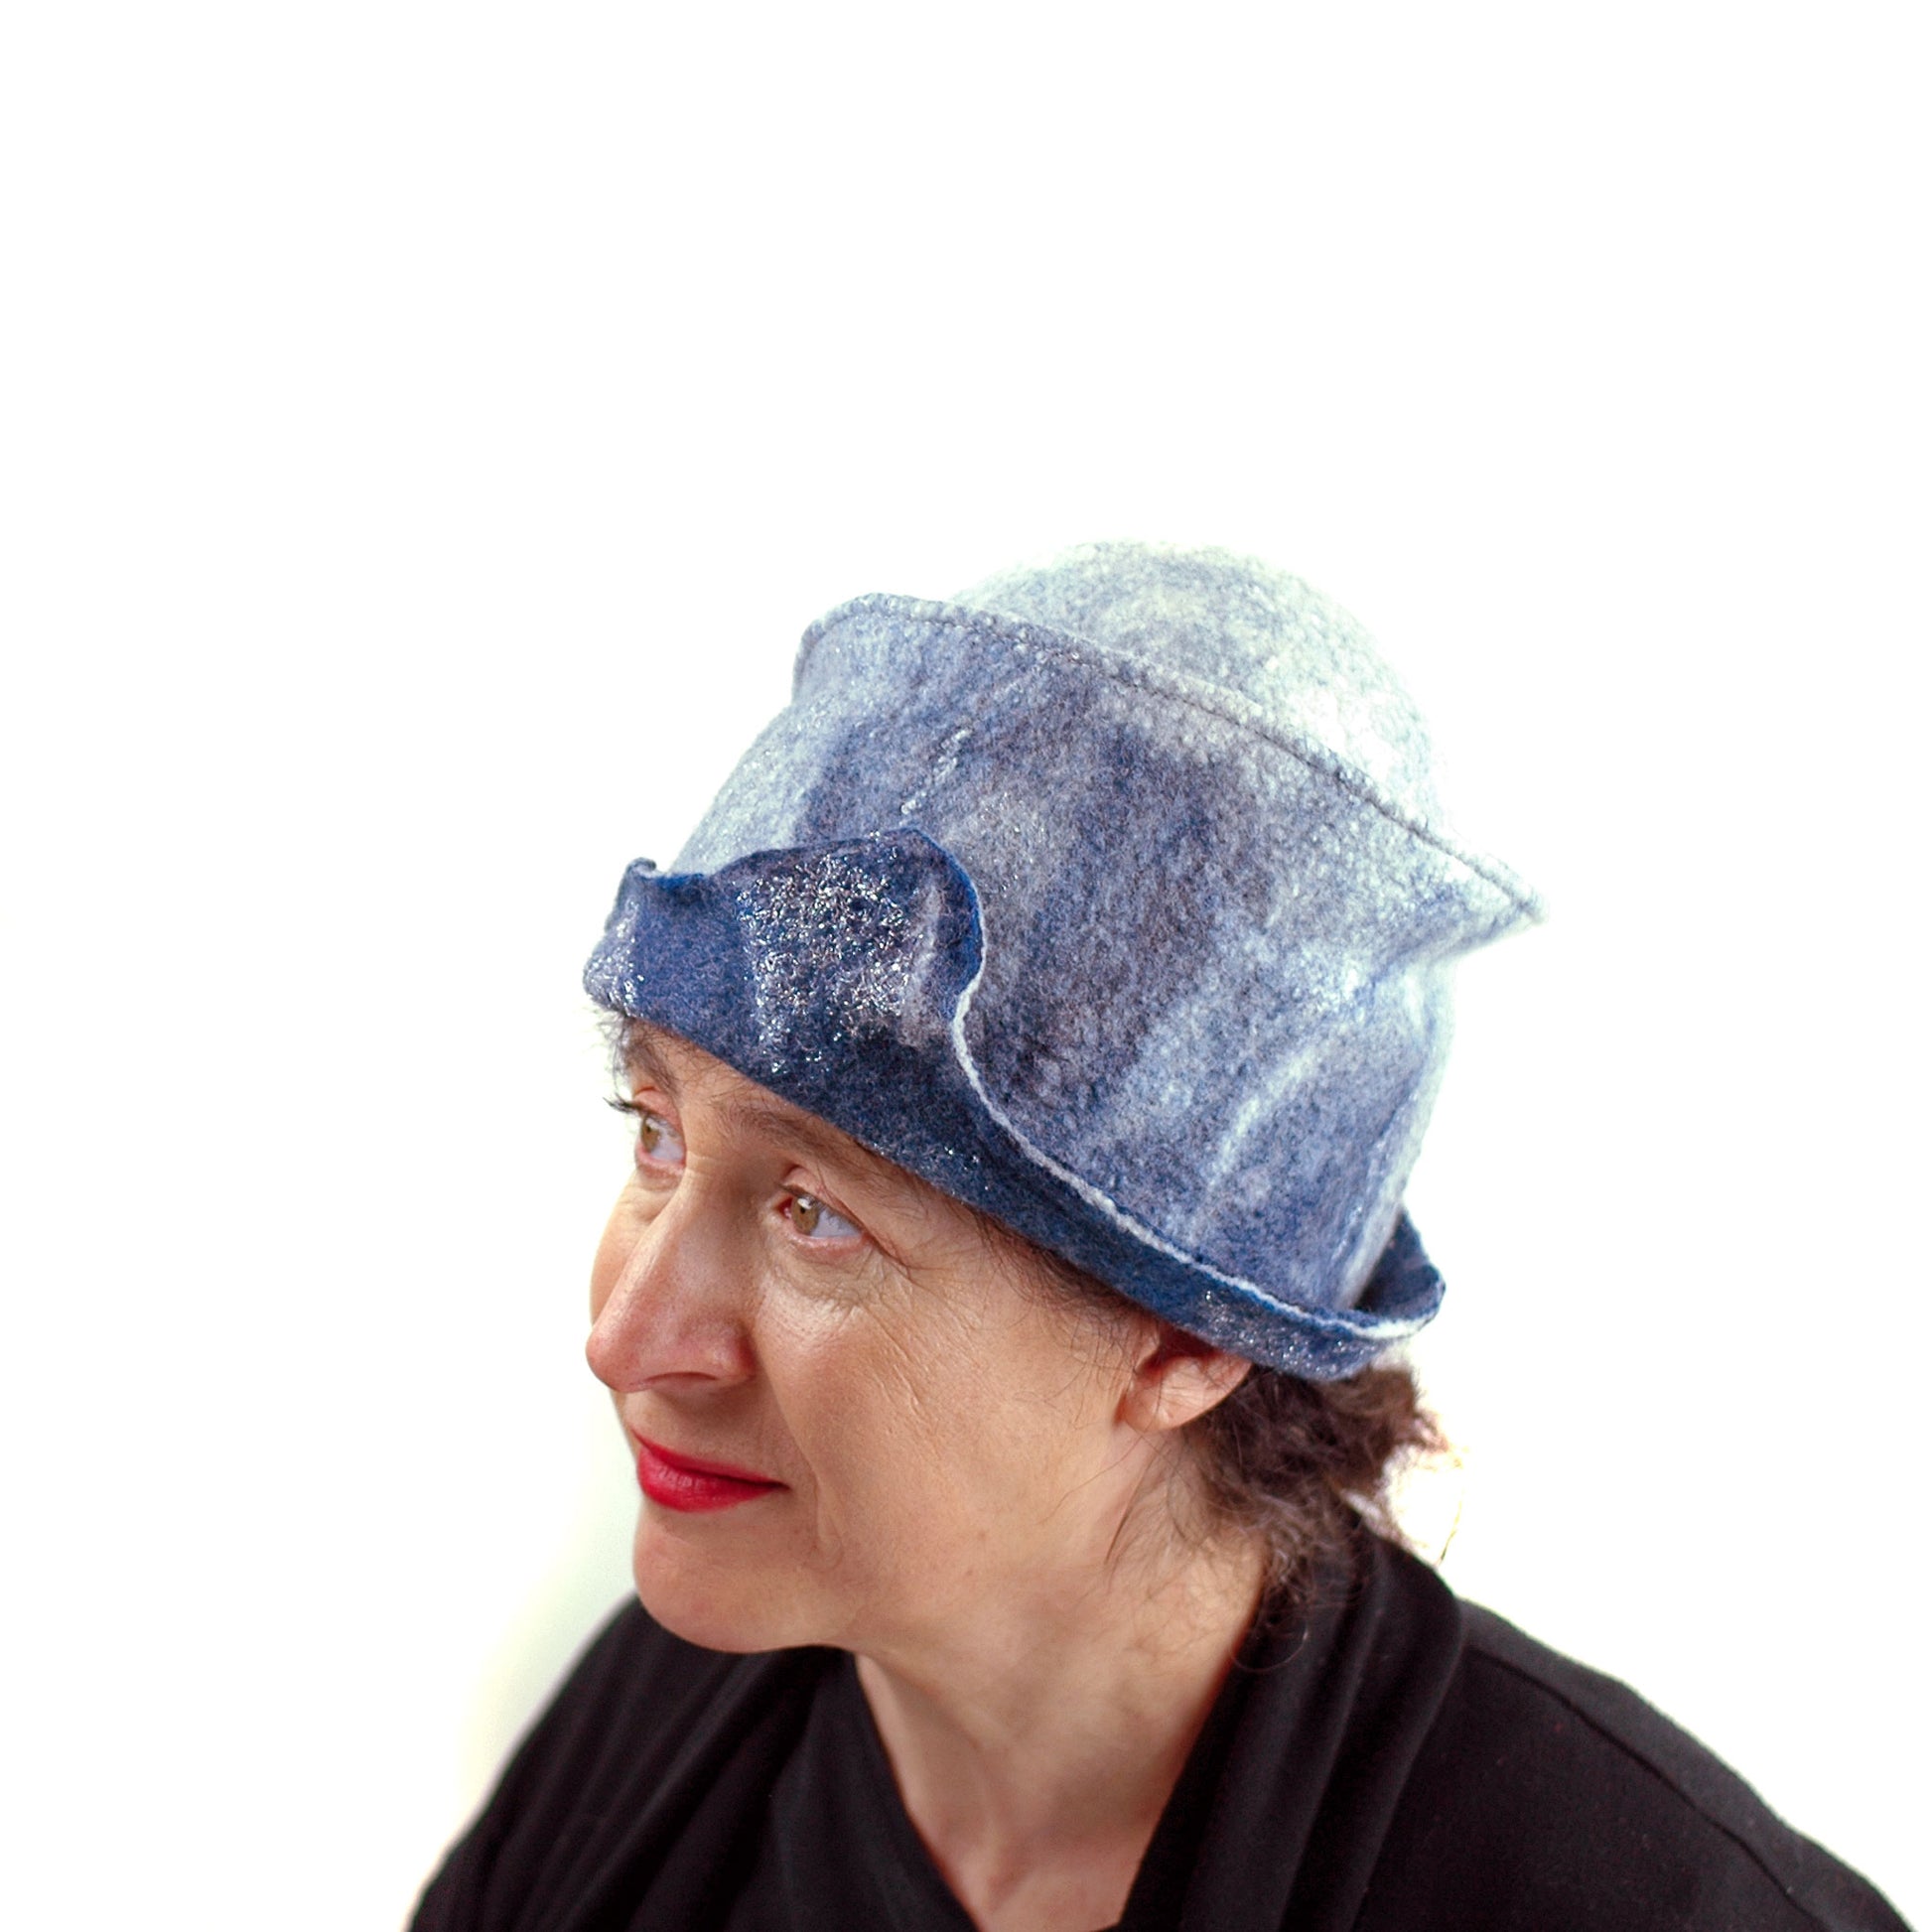 Indigo and White Felted Cloche Hat made with Superfine Merino Wool and Silver Lace - left side view